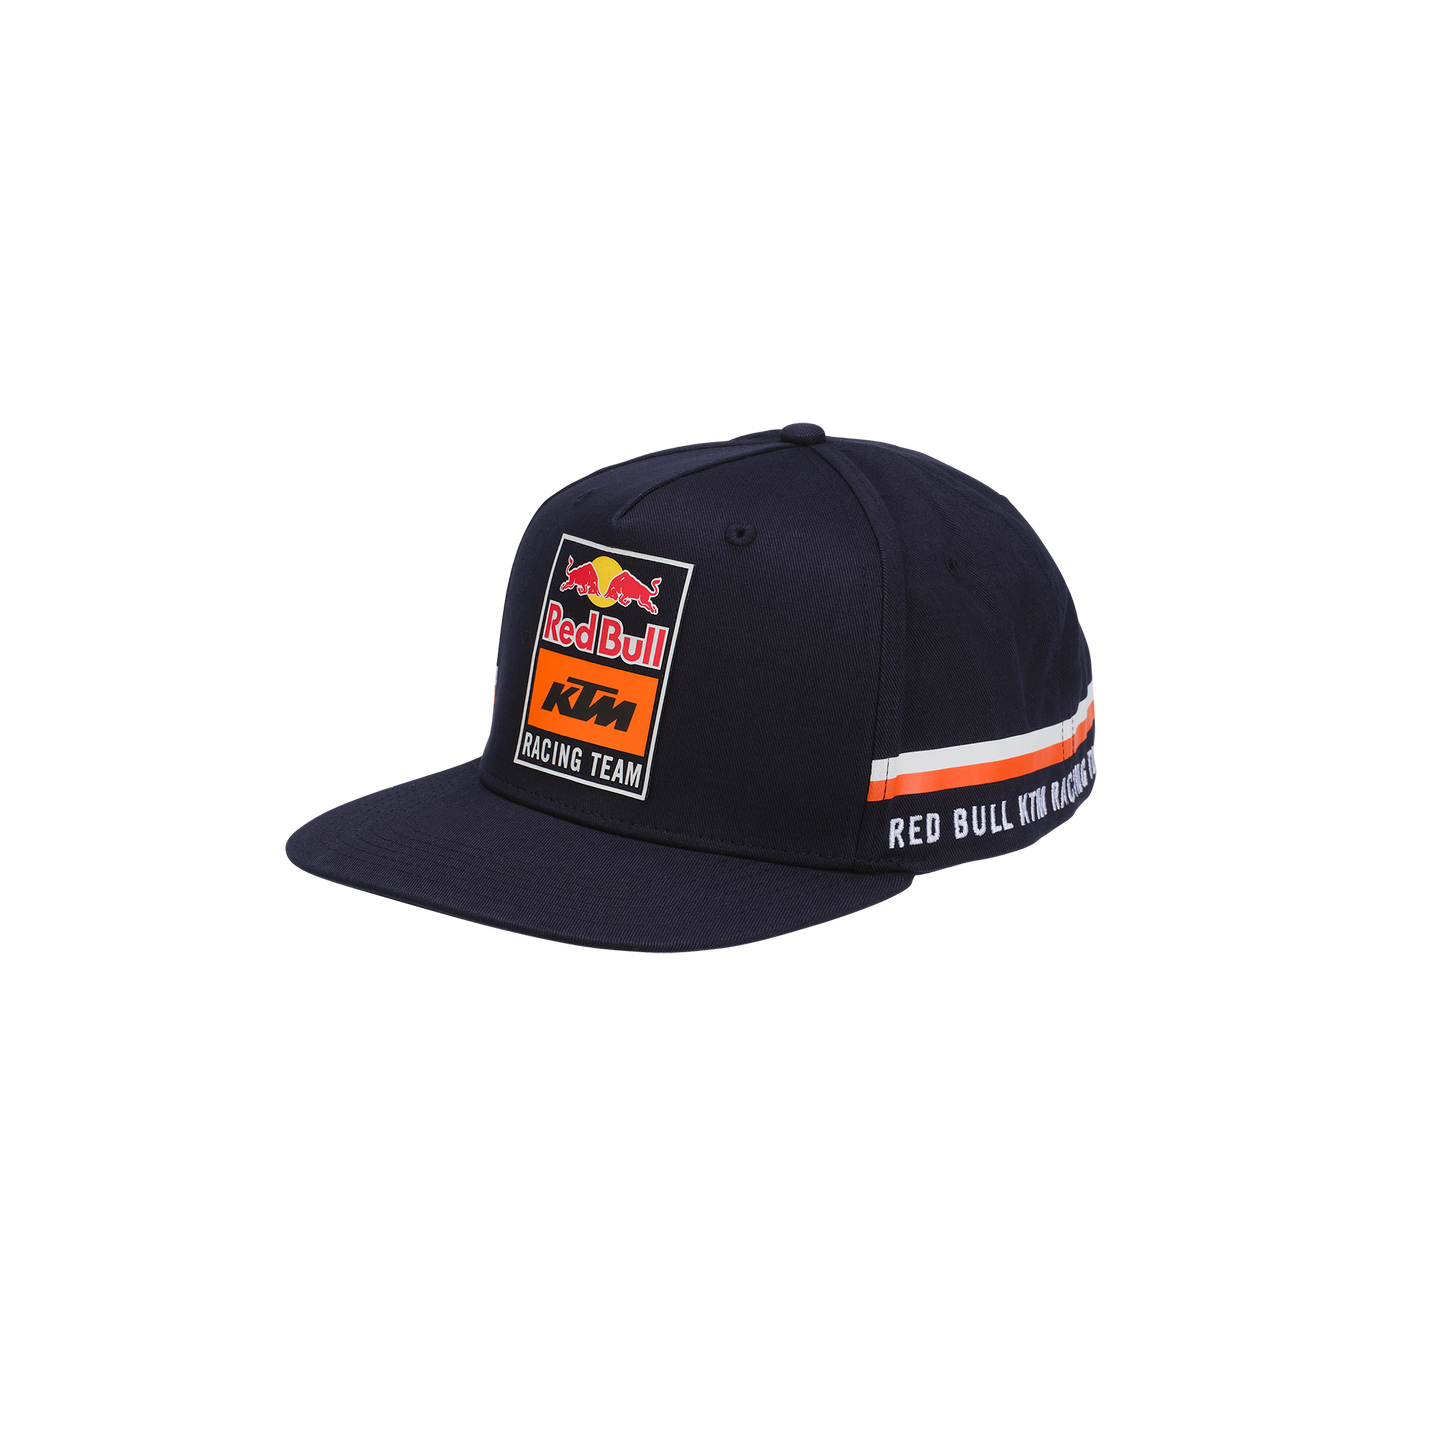 RED BULL KTM TRACTION FLAT CAP